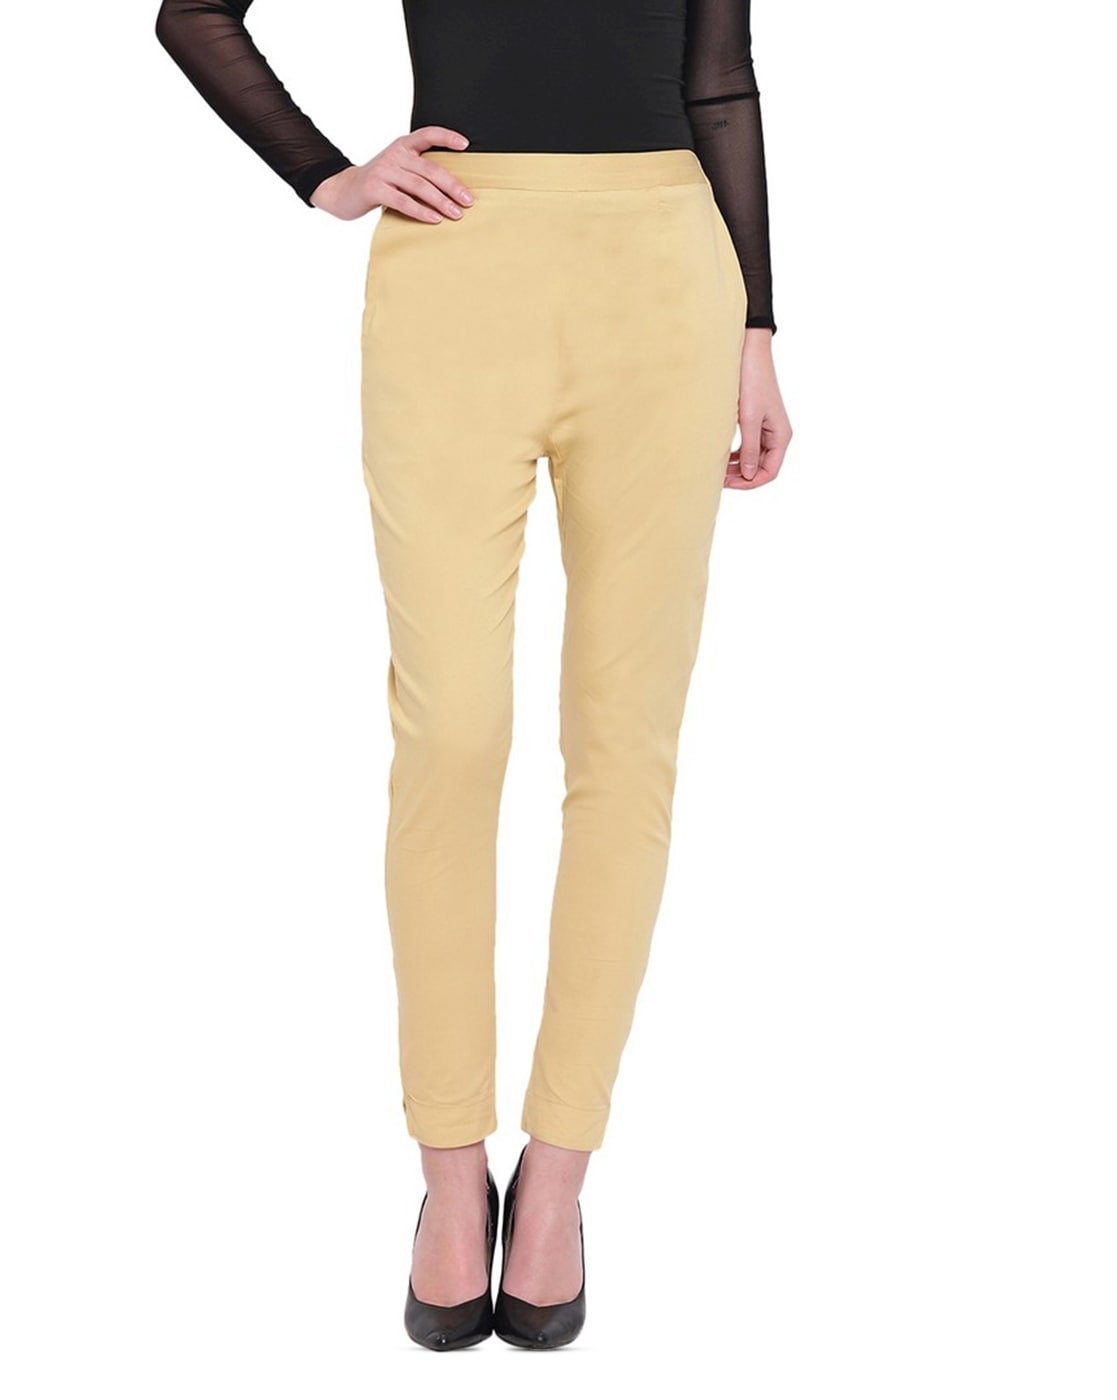 Buy Skin Colour Straight Fit Trouser Online  1999 from ShopClues